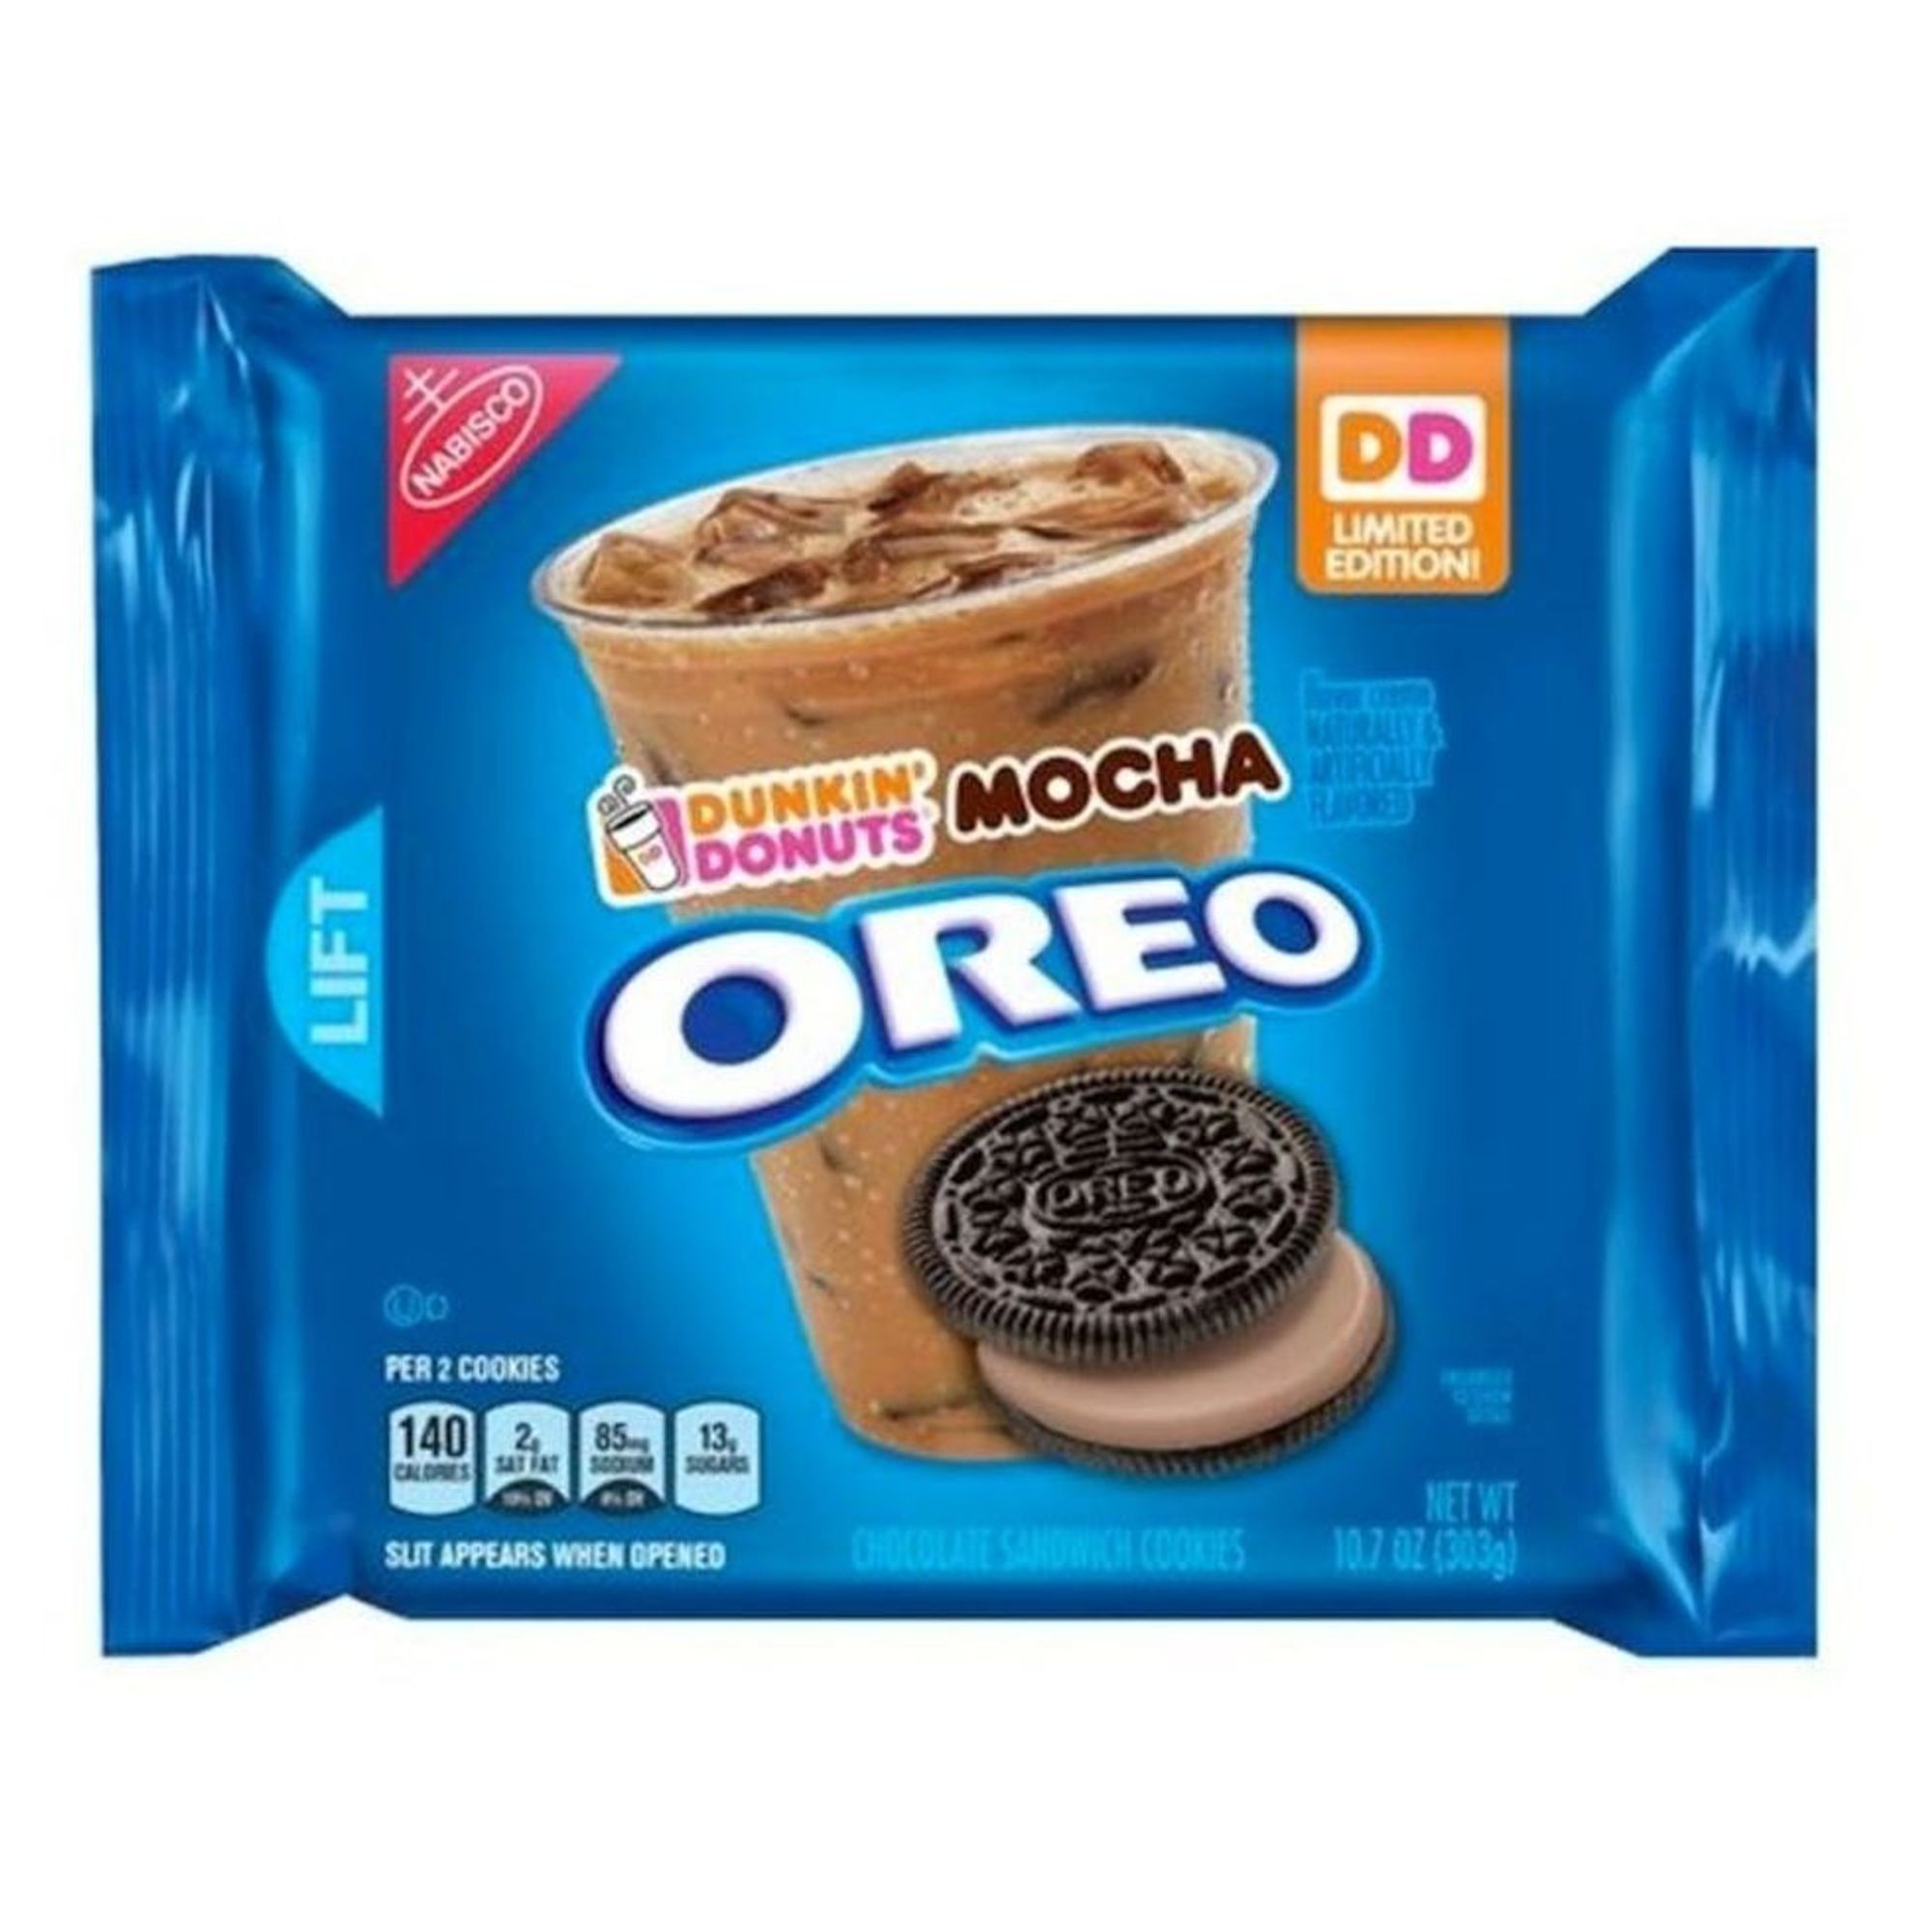 Dunkin’ Donuts Oreo Mocha Cookies Are About to Be Your New